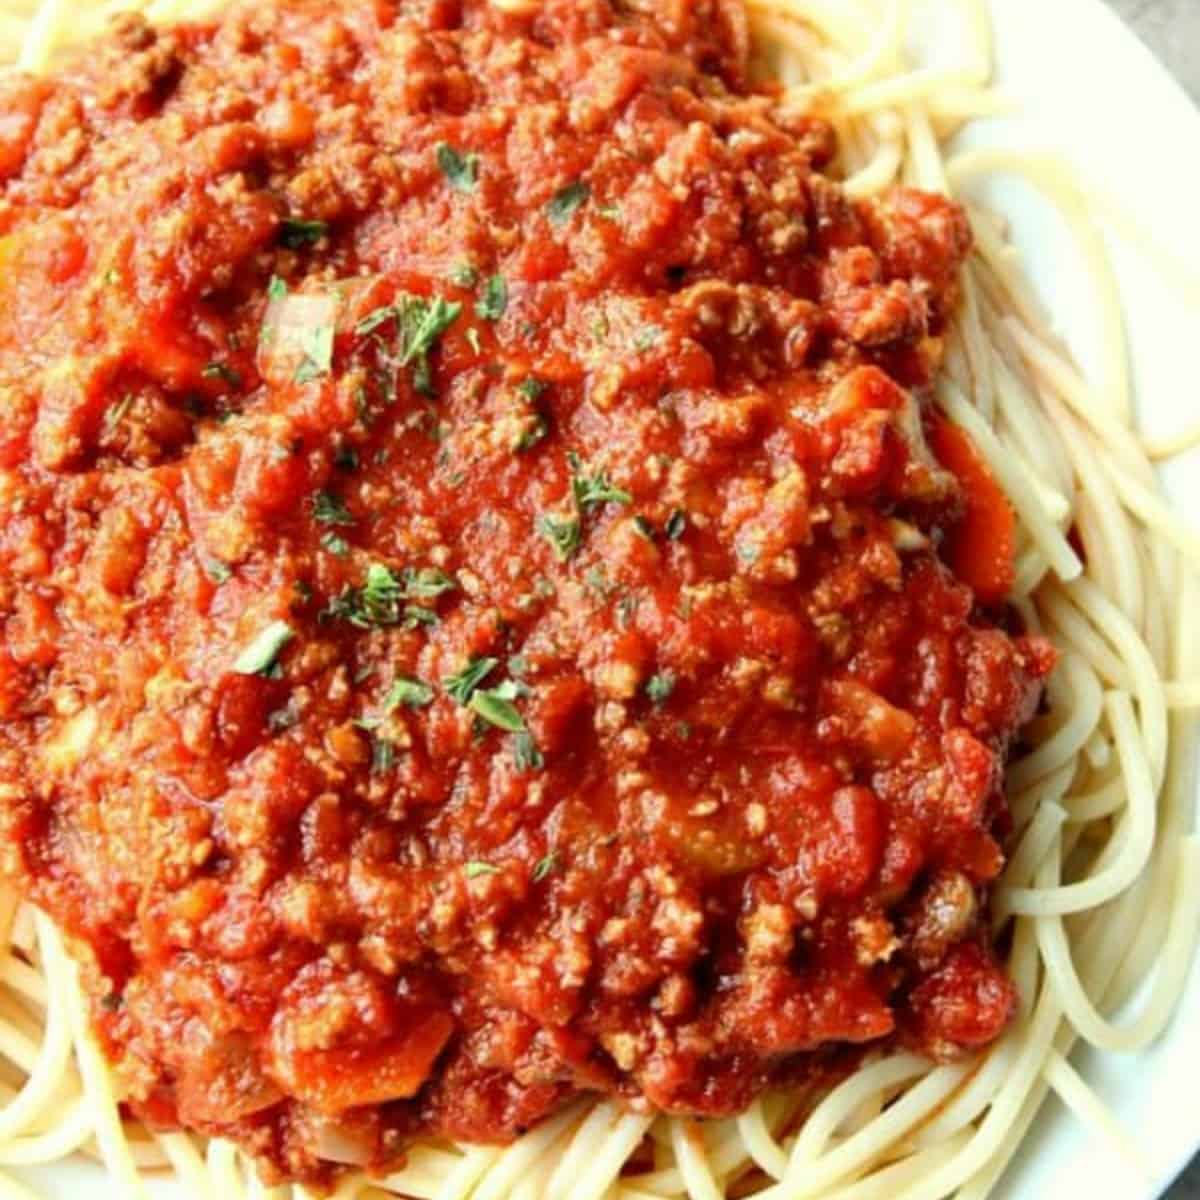 Bolognese sauce over pasta in a bowl.